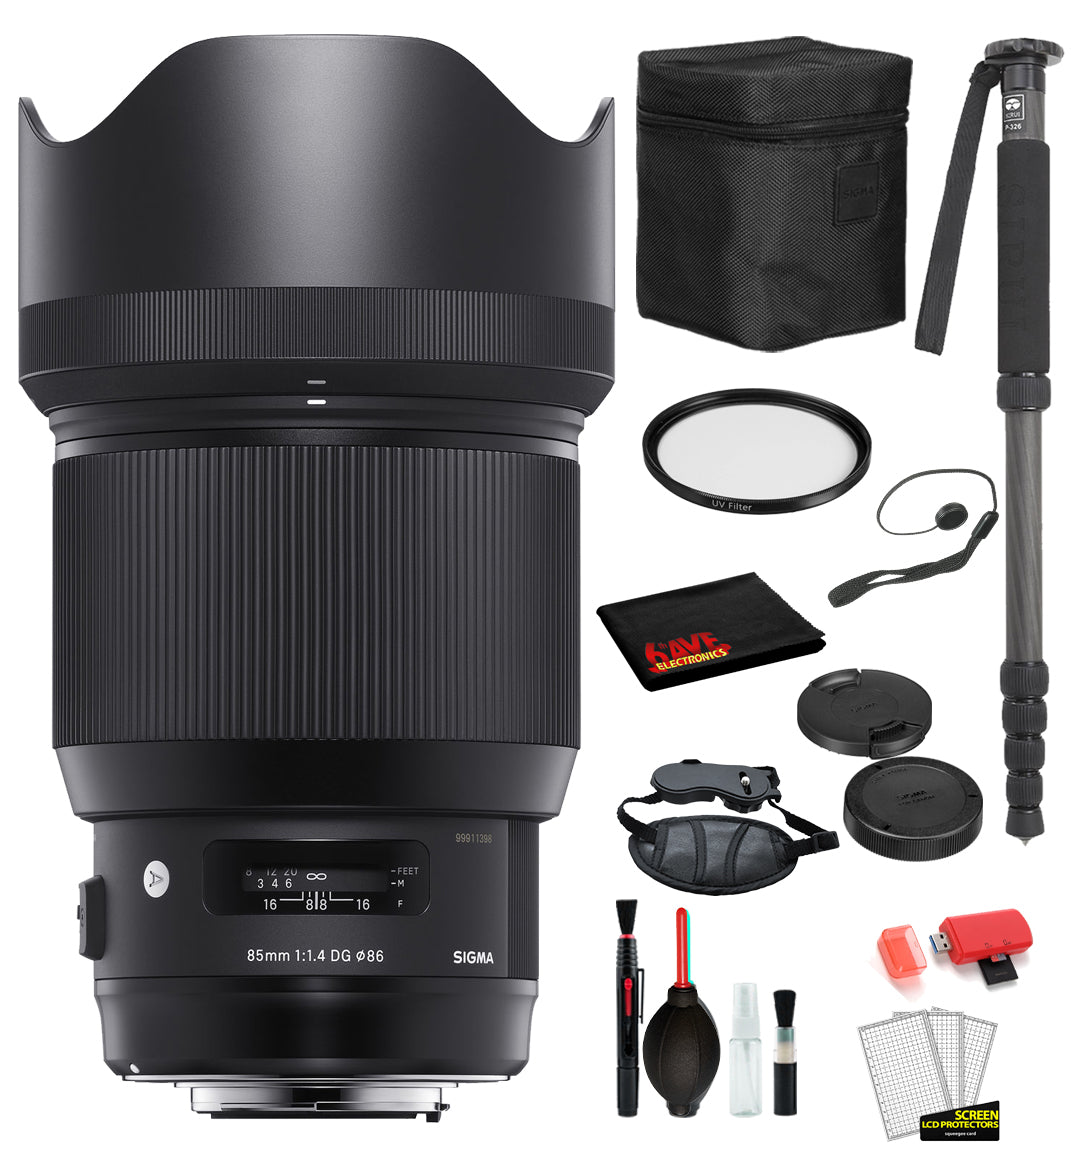 Sigma 85mm f/1.4 DG HSM Art Lens for Canon EF with Bundle Includes: UV Filter + 70?? Monopod + More